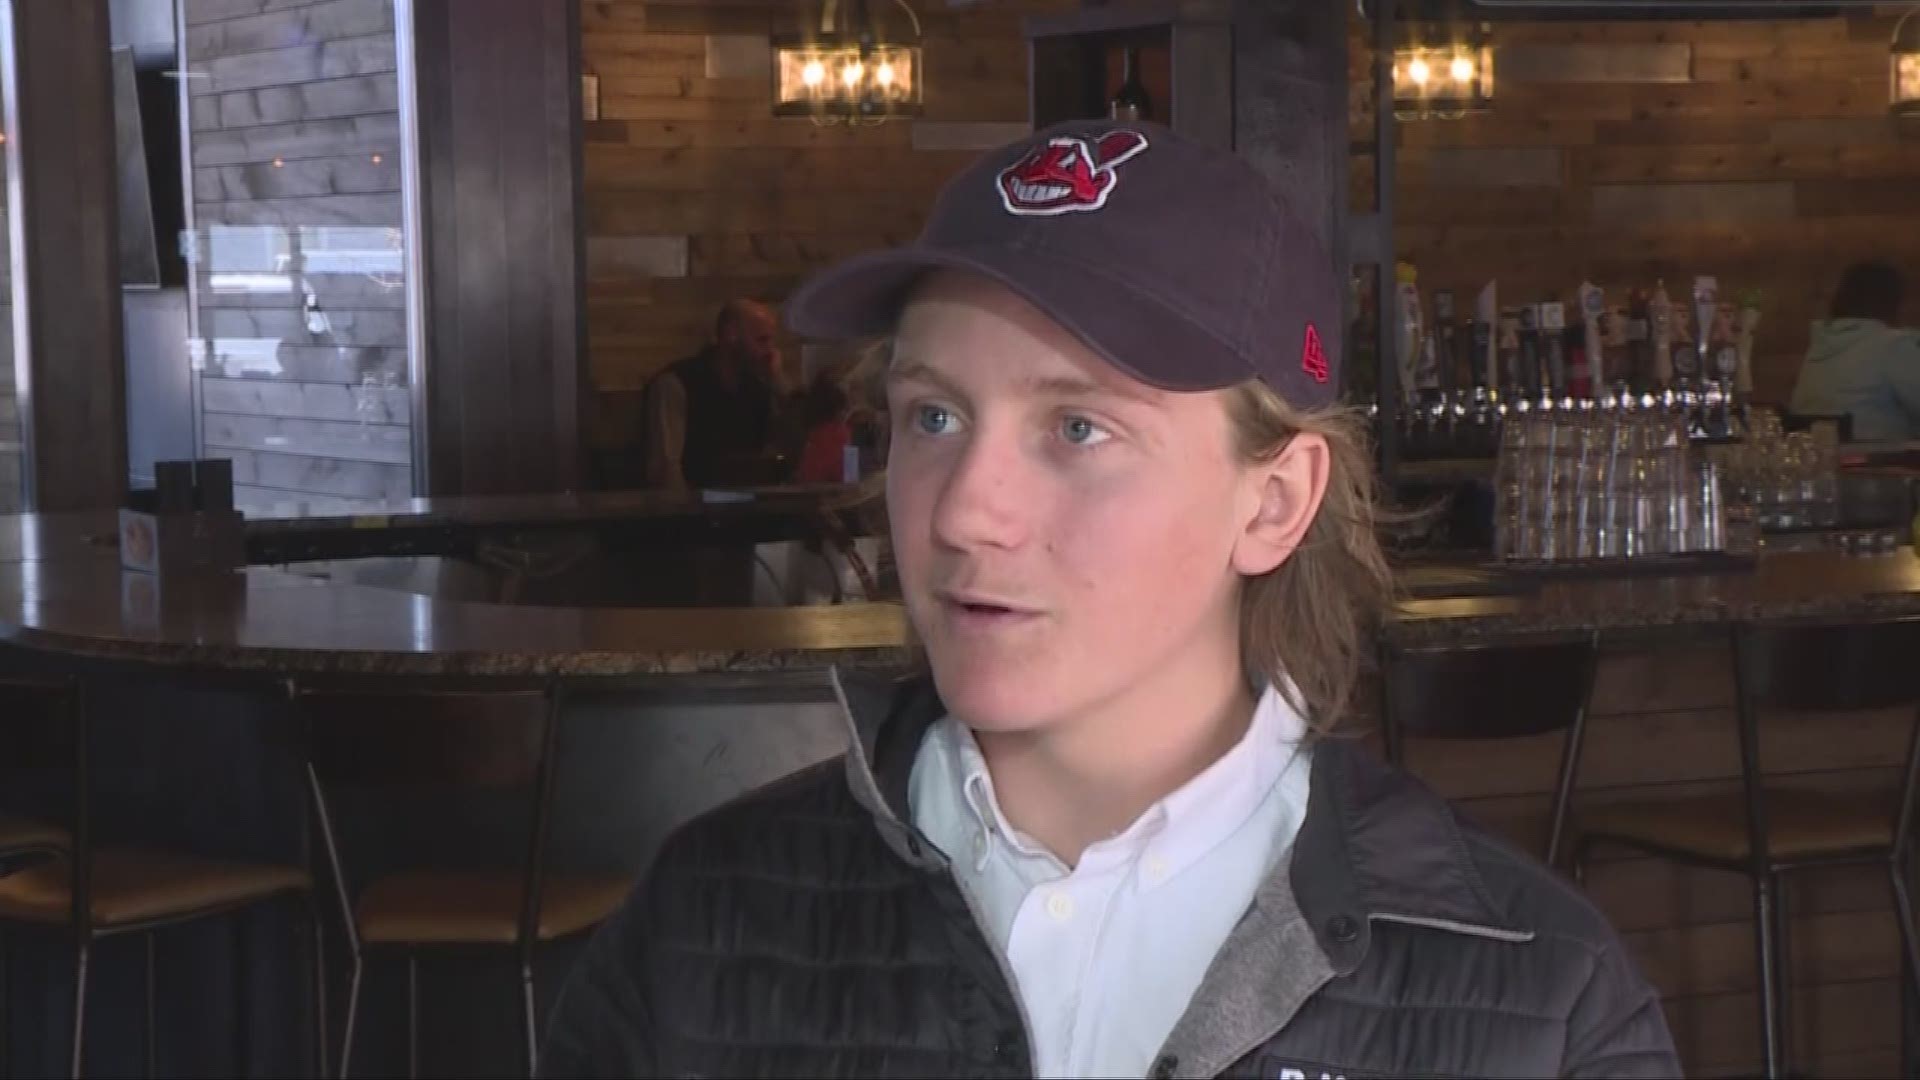 Olympic gold medalist Red Gerard returns home to Northeast Ohio